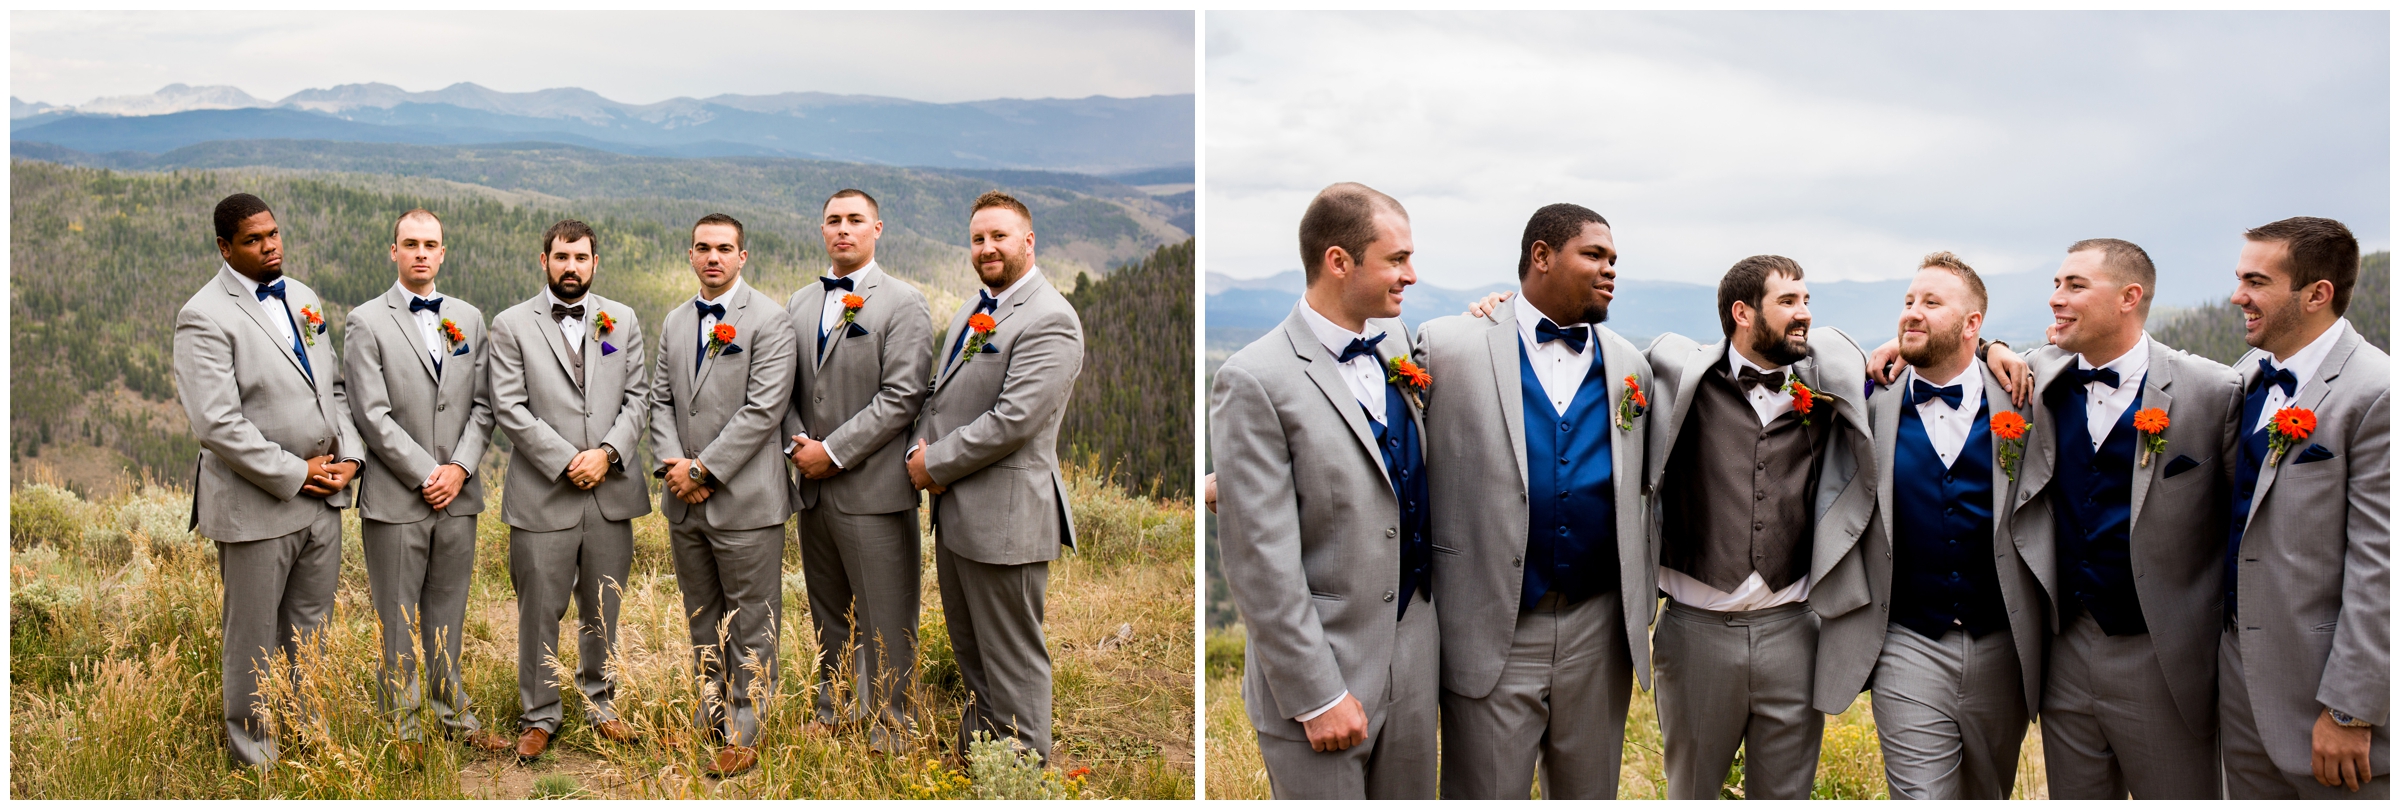 groomsmen in gray and blue posing with Colorado mountains in background 